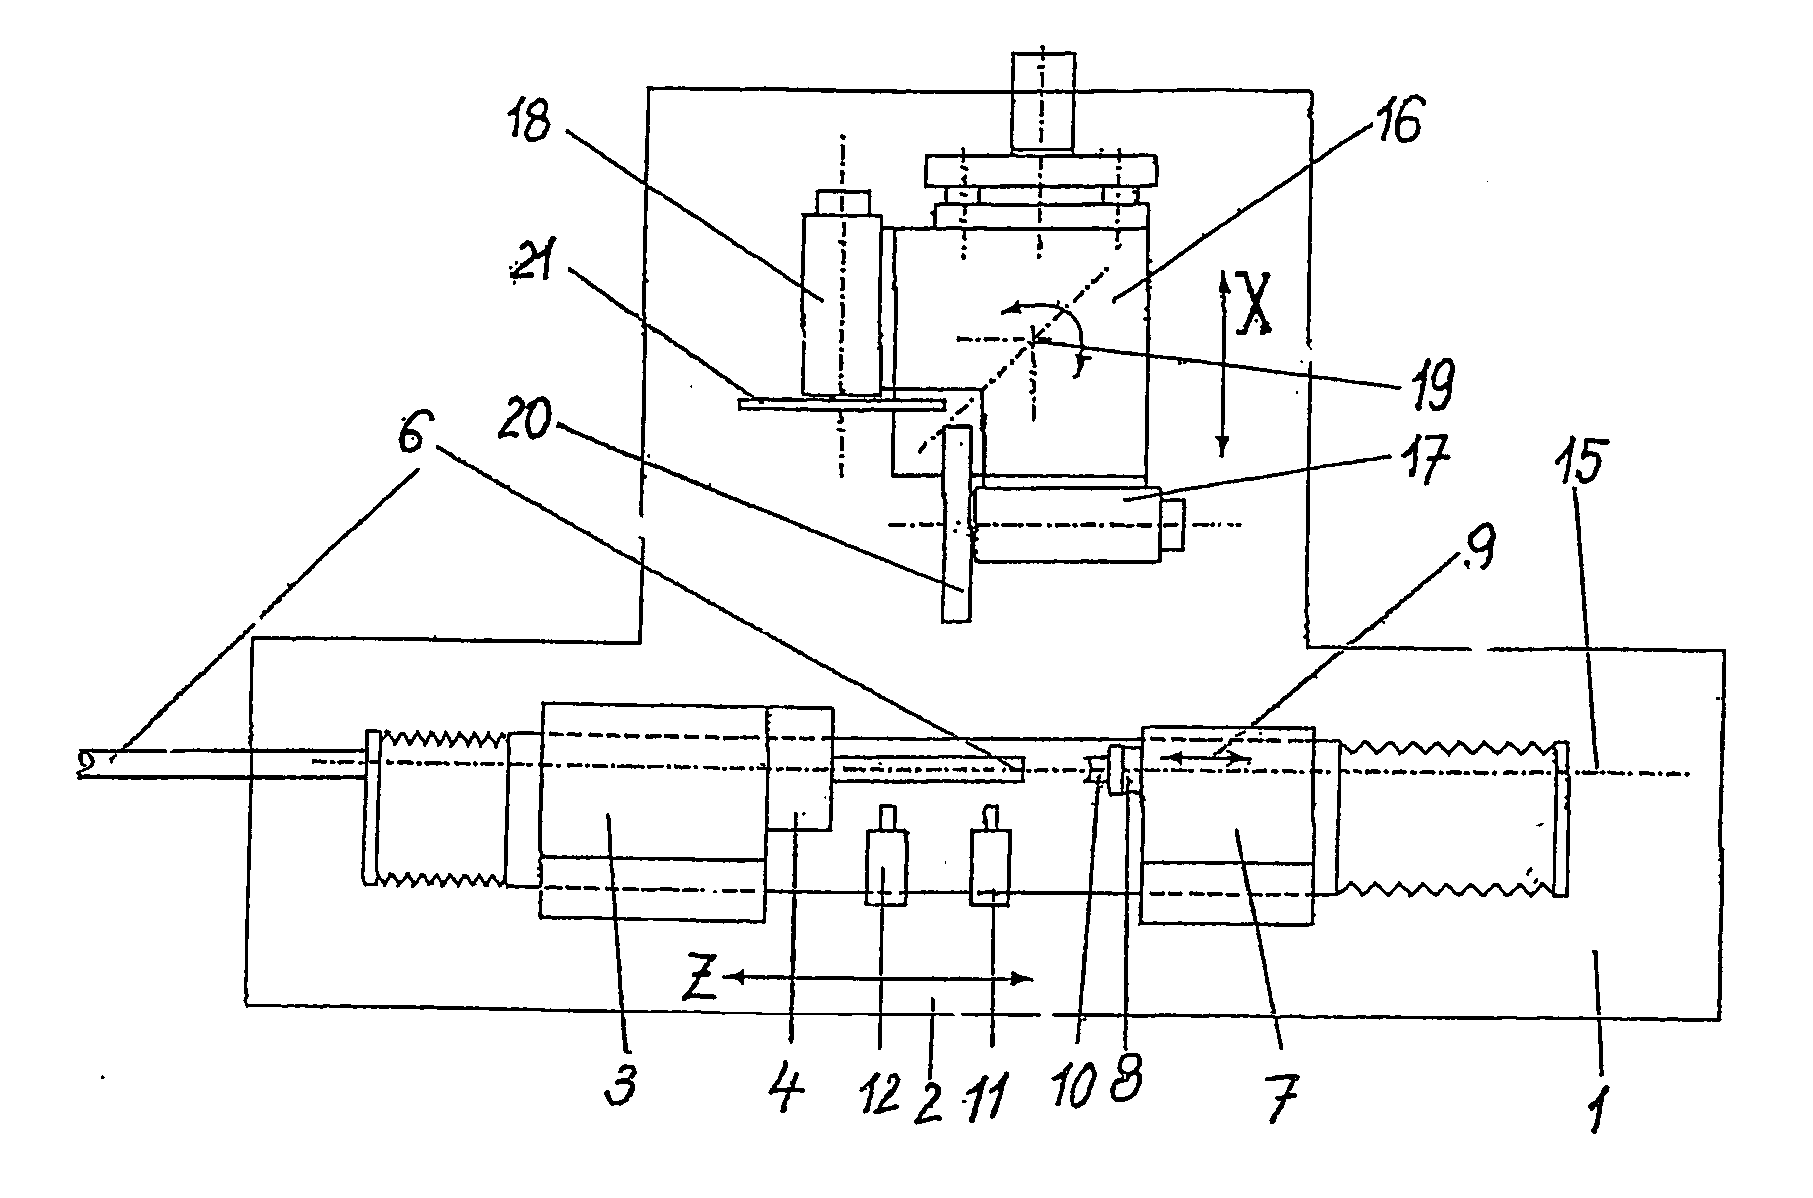 Cylindrical grinding method for producing hard metal tools and cylindrical grinding machine for grinding cylindrical starting bodies during the production of hard metal tools